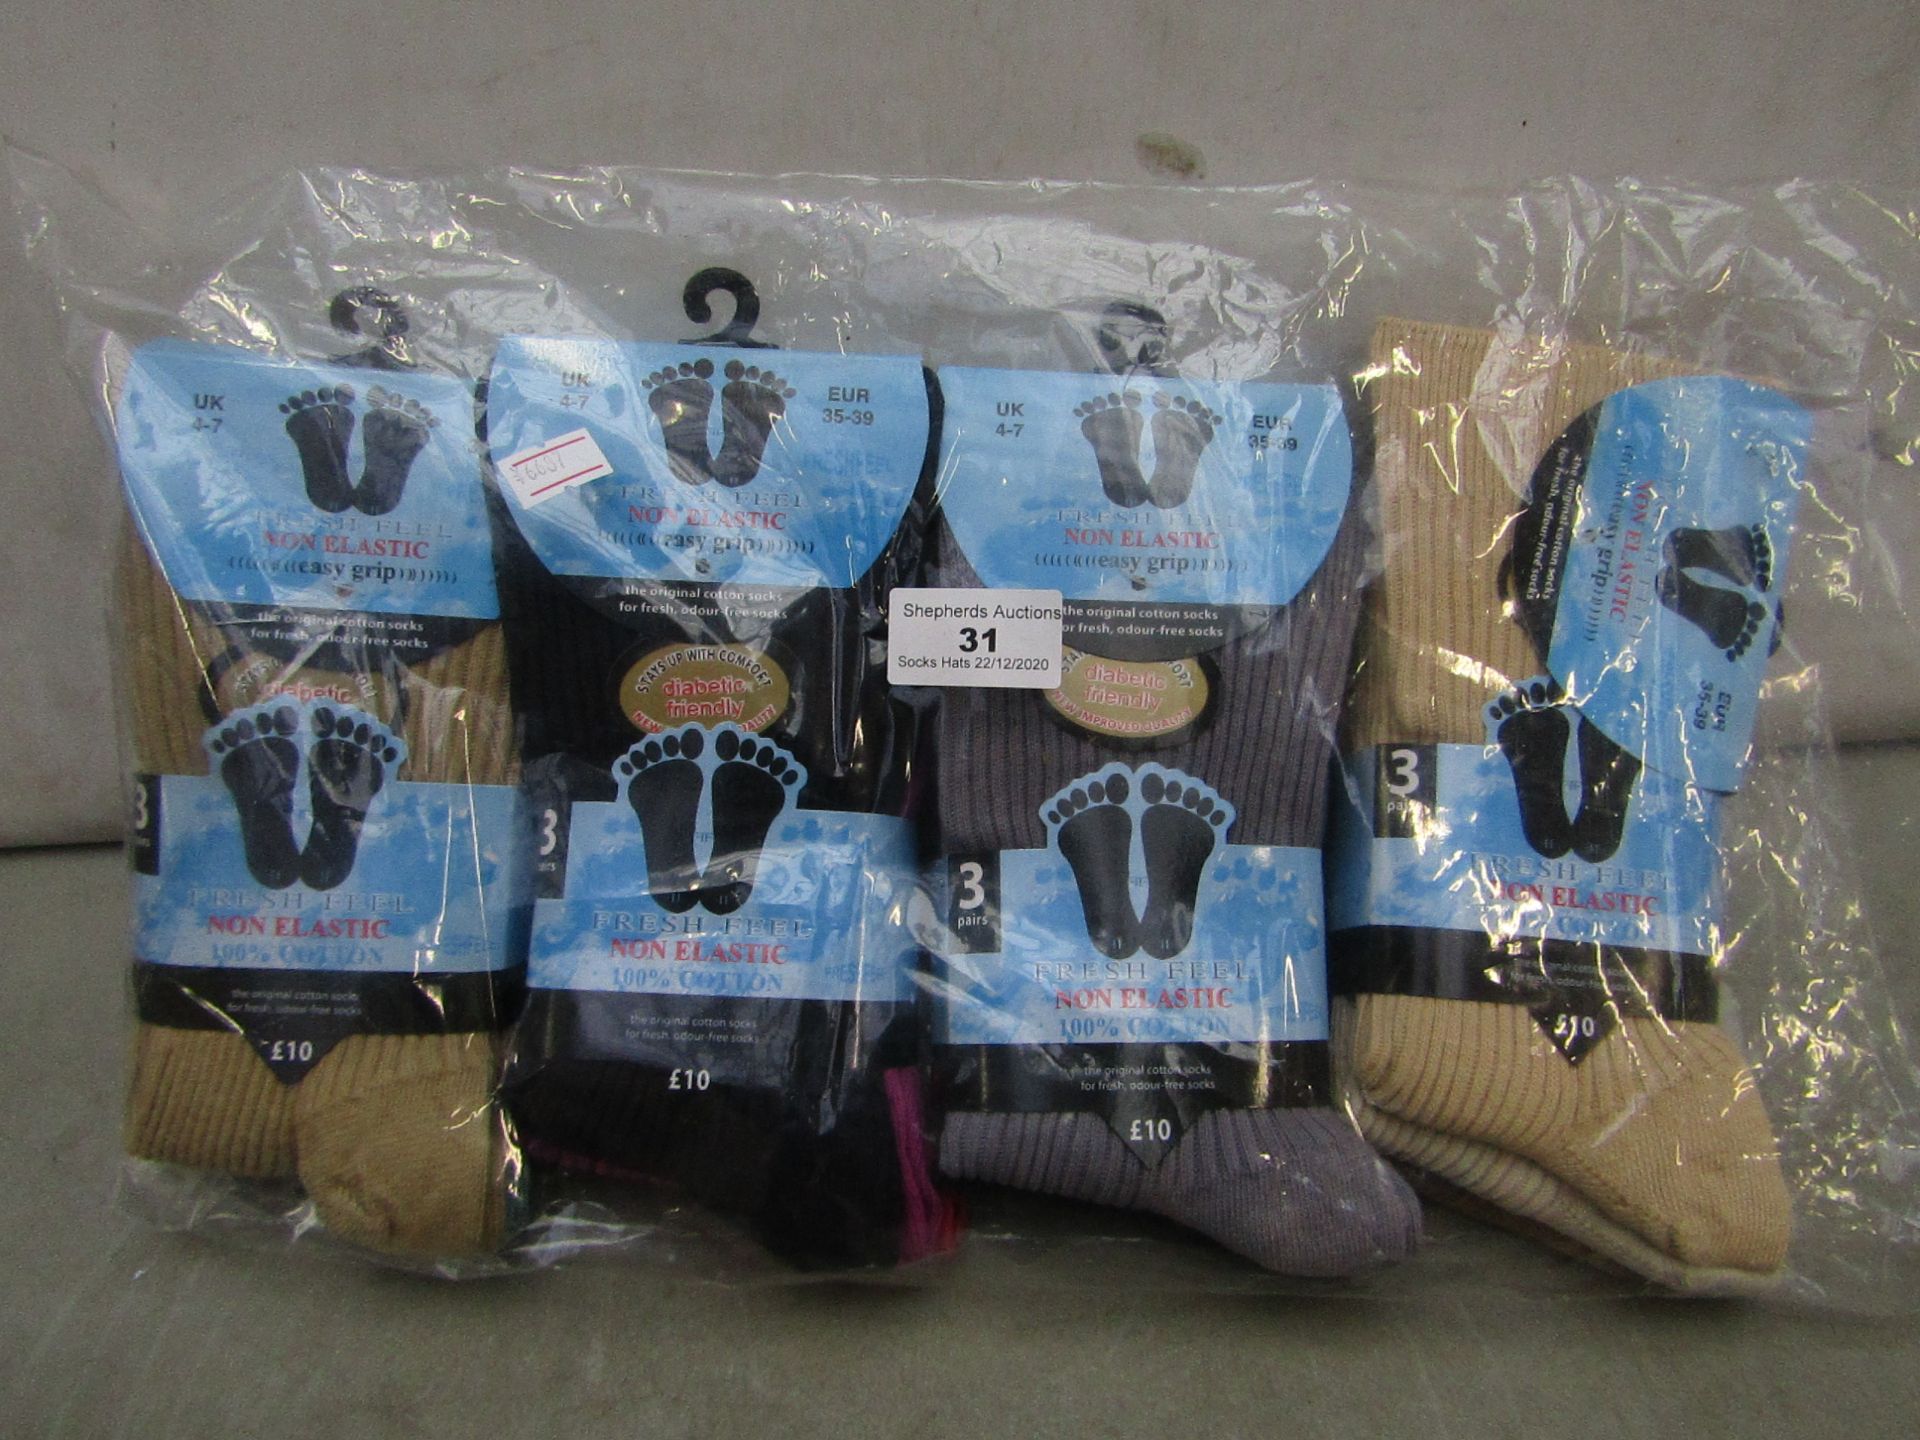 Pack Of 12 - Fresh Feel - Non Elastic Easy Grip Cotton Socks - Size 4-7 - Assorted Colours - New &